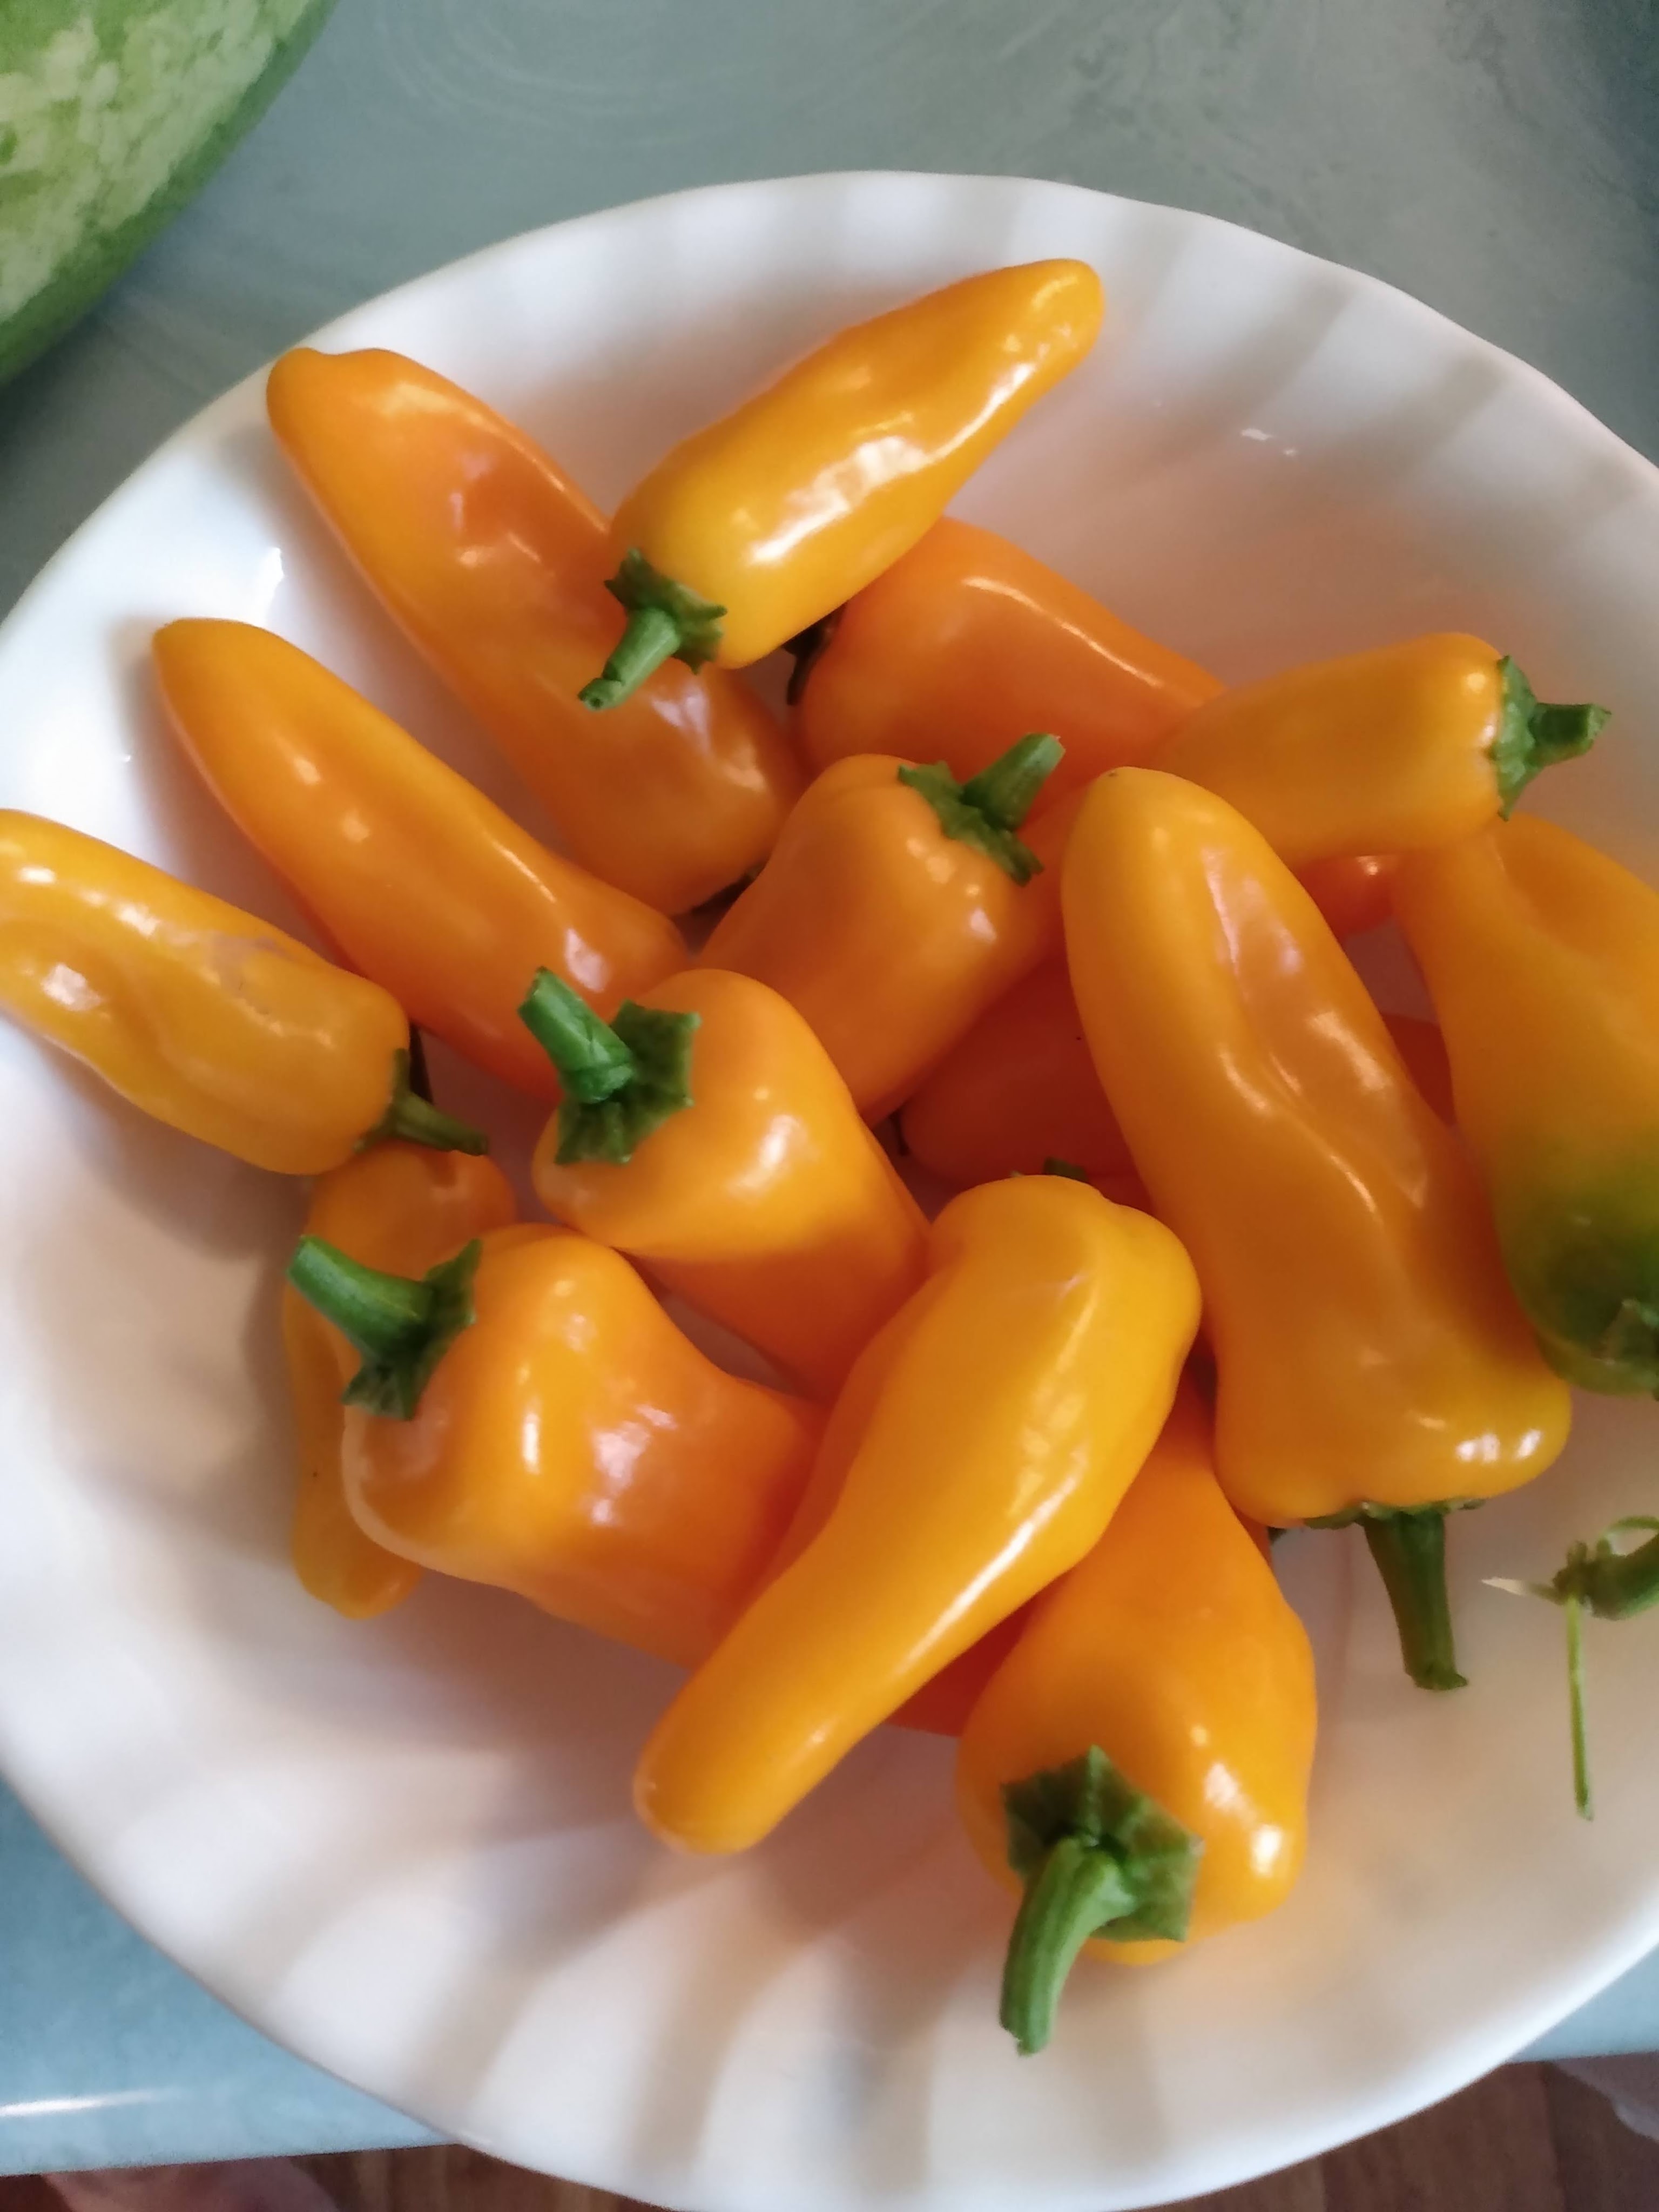 Bowl of small yellow peppers